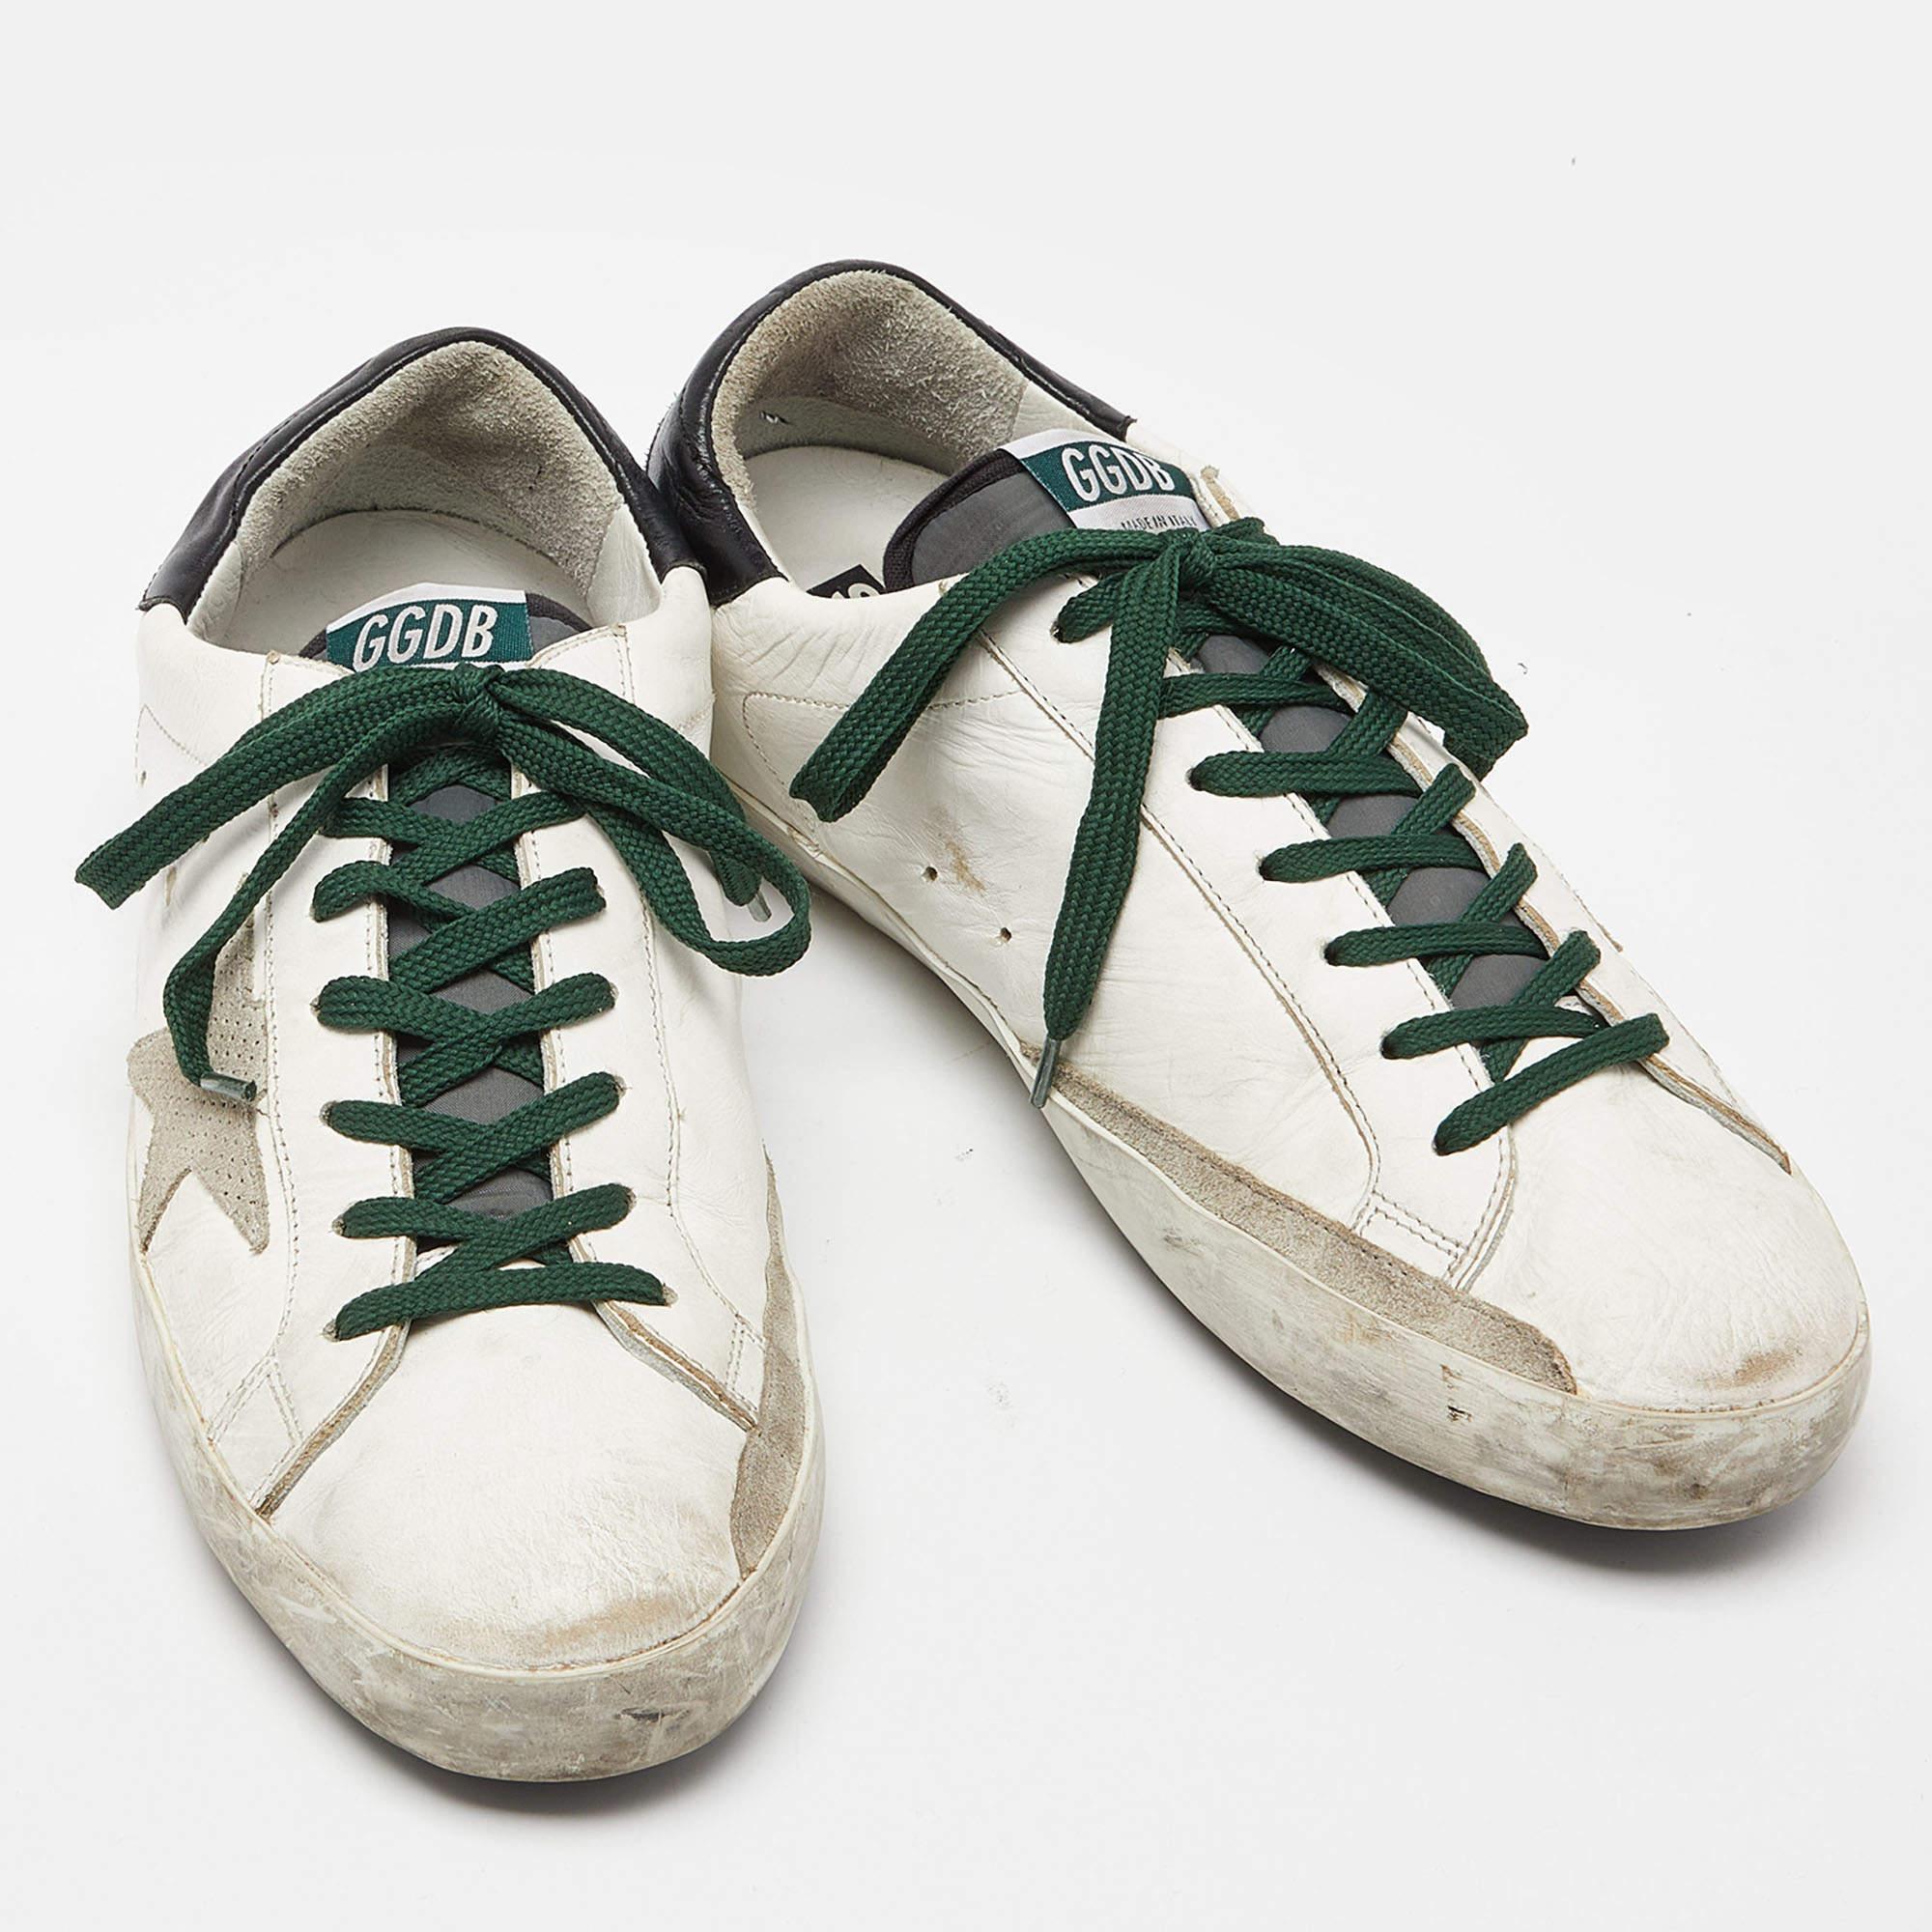 Golden Goose White Leather And Grey Suede Hi Star Sneakers Size 43 In Good Condition For Sale In Dubai, Al Qouz 2